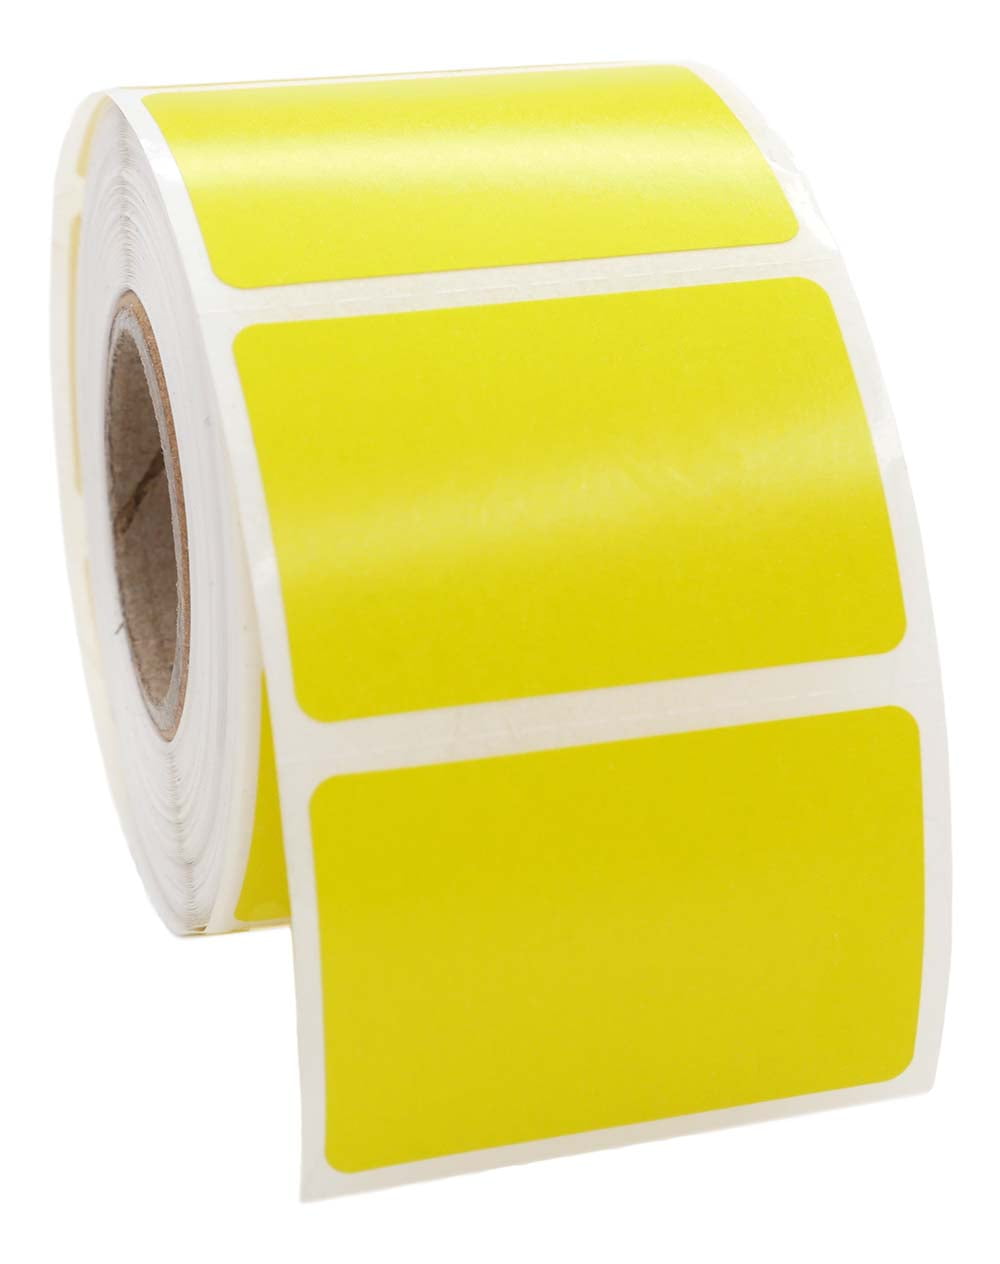 12 Rolls 2.25x1.25 Direct Thermal Barcode Label for Zebra LP2824 TLP2824Z LP2844 